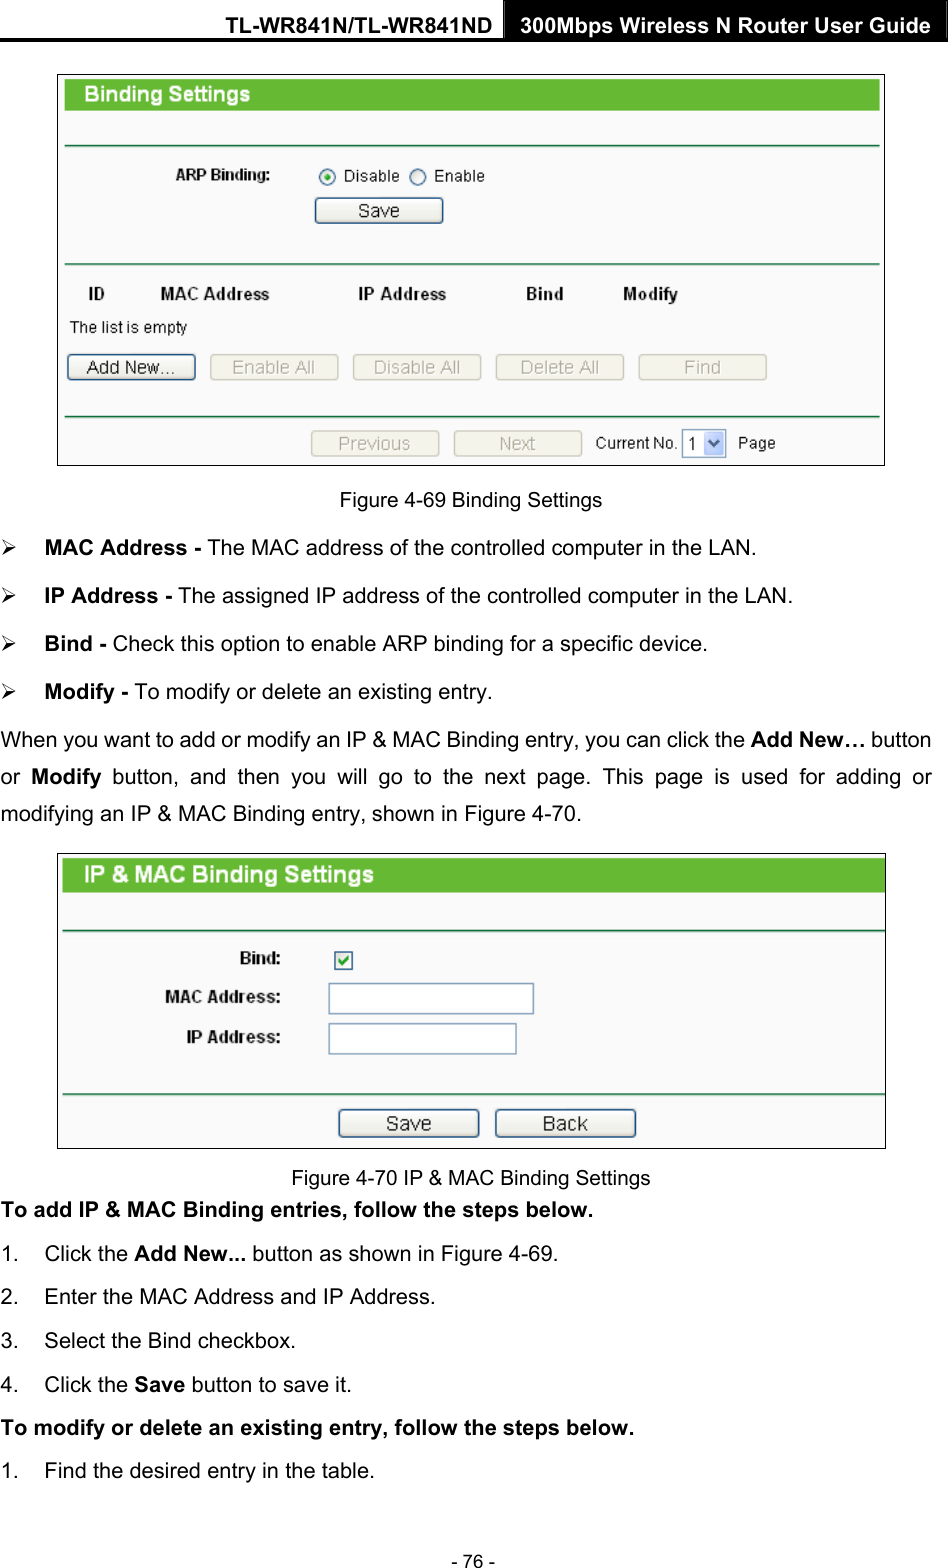 TL-WR841N/TL-WR841ND 300Mbps Wireless N Router User Guide - 76 -  Figure 4-69 Binding Settings ¾ MAC Address - The MAC address of the controlled computer in the LAN.   ¾ IP Address - The assigned IP address of the controlled computer in the LAN.   ¾ Bind - Check this option to enable ARP binding for a specific device.   ¾ Modify - To modify or delete an existing entry.   When you want to add or modify an IP &amp; MAC Binding entry, you can click the Add New… button or  Modify button, and then you will go to the next page. This page is used for adding or modifying an IP &amp; MAC Binding entry, shown in Figure 4-70.    Figure 4-70 IP &amp; MAC Binding Settings To add IP &amp; MAC Binding entries, follow the steps below. 1. Click the Add New... button as shown in Figure 4-69.  2.  Enter the MAC Address and IP Address. 3.  Select the Bind checkbox.   4. Click the Save button to save it. To modify or delete an existing entry, follow the steps below. 1.  Find the desired entry in the table.   